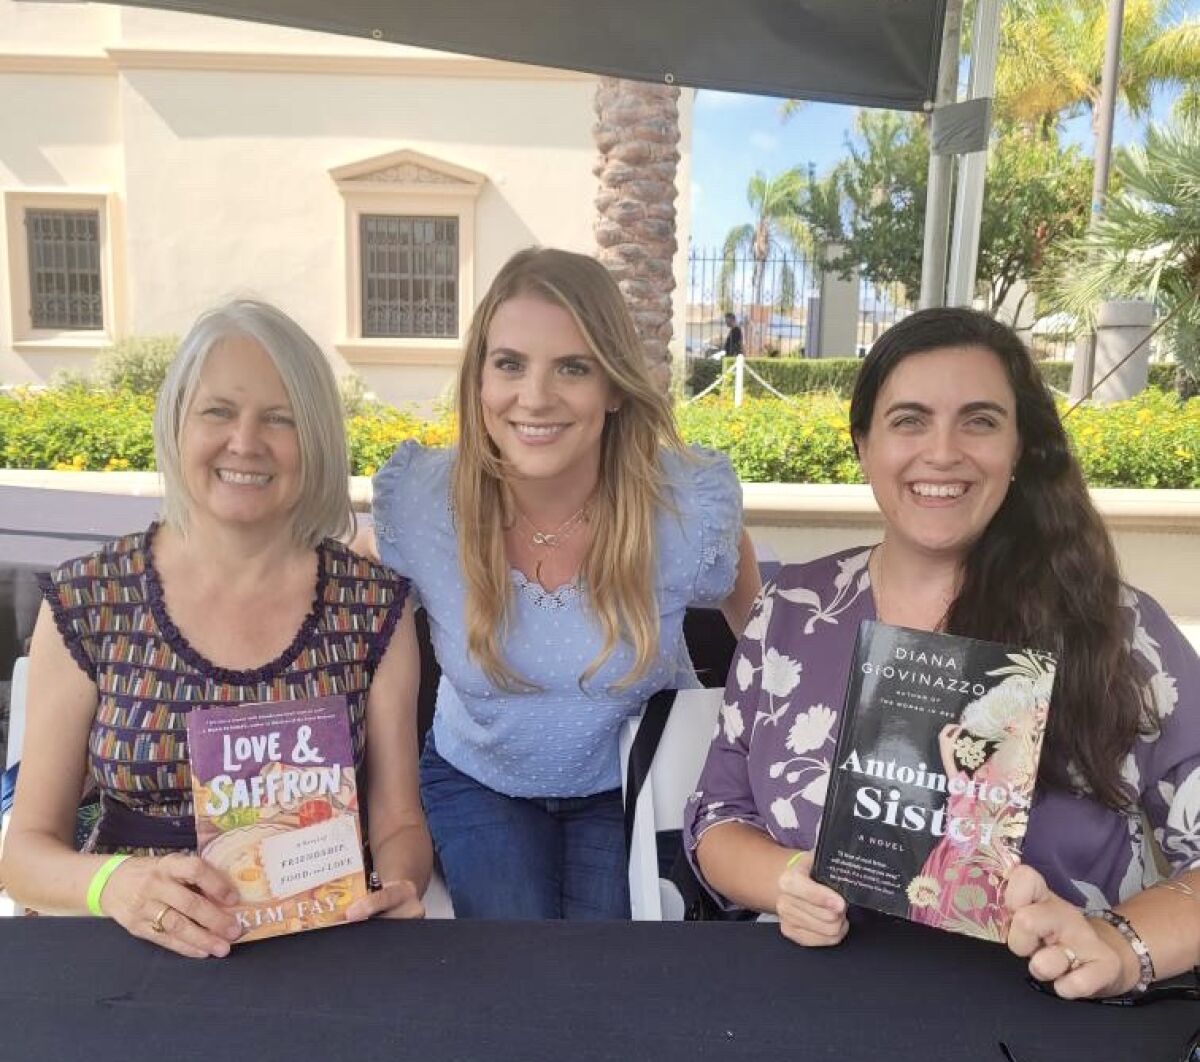 Kim Fay, Elisabeth Frausto and Diana Giovinazzo after their historical fiction panel discussion at the Festival of Books